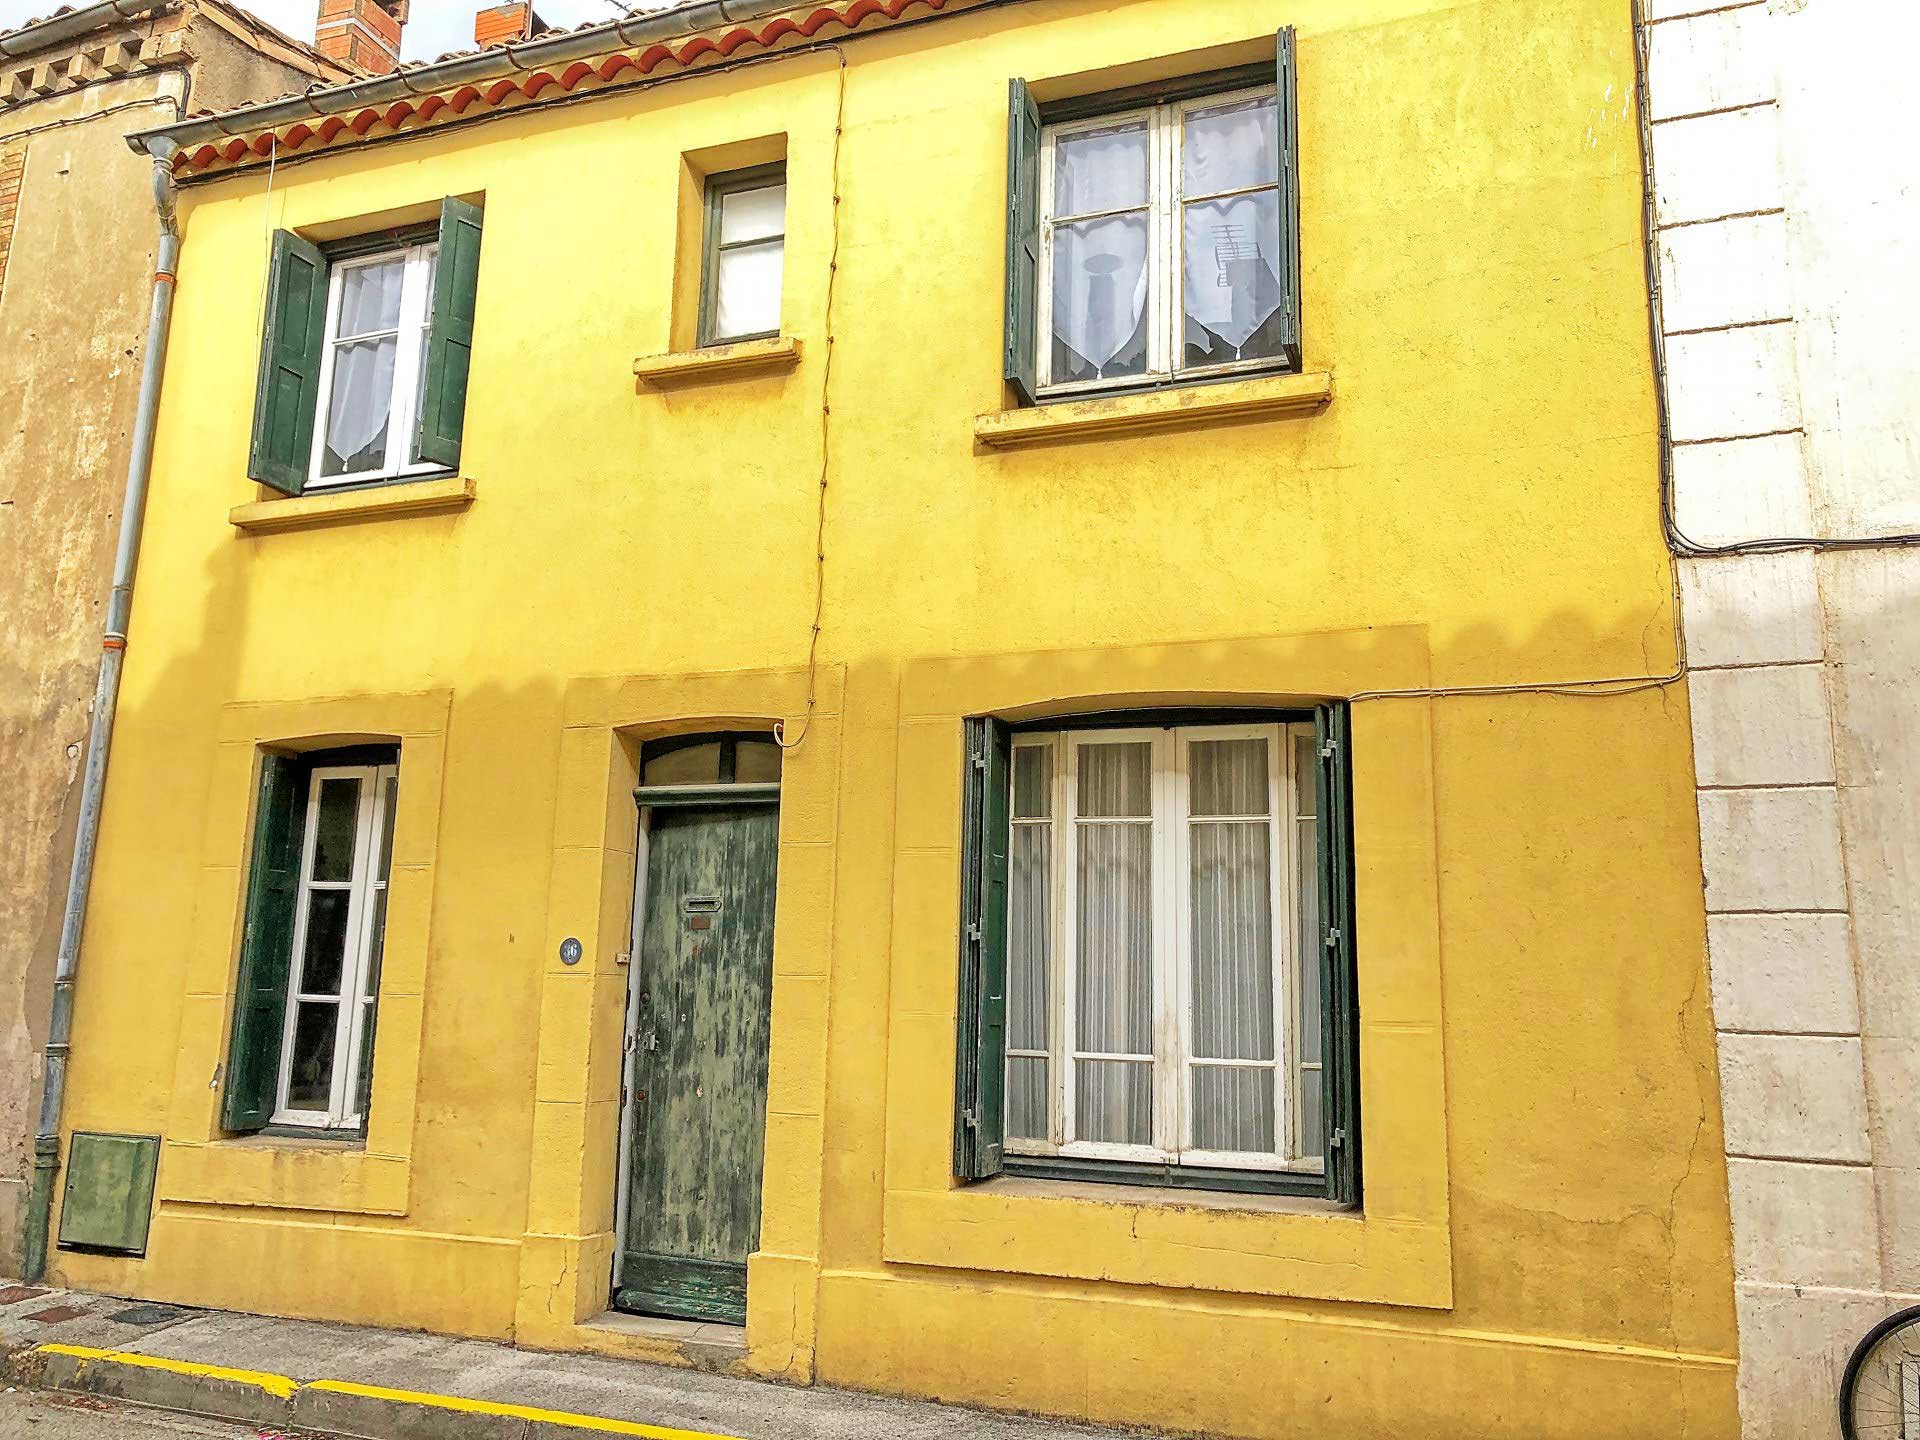 Yellow house for sale in Carcassonne